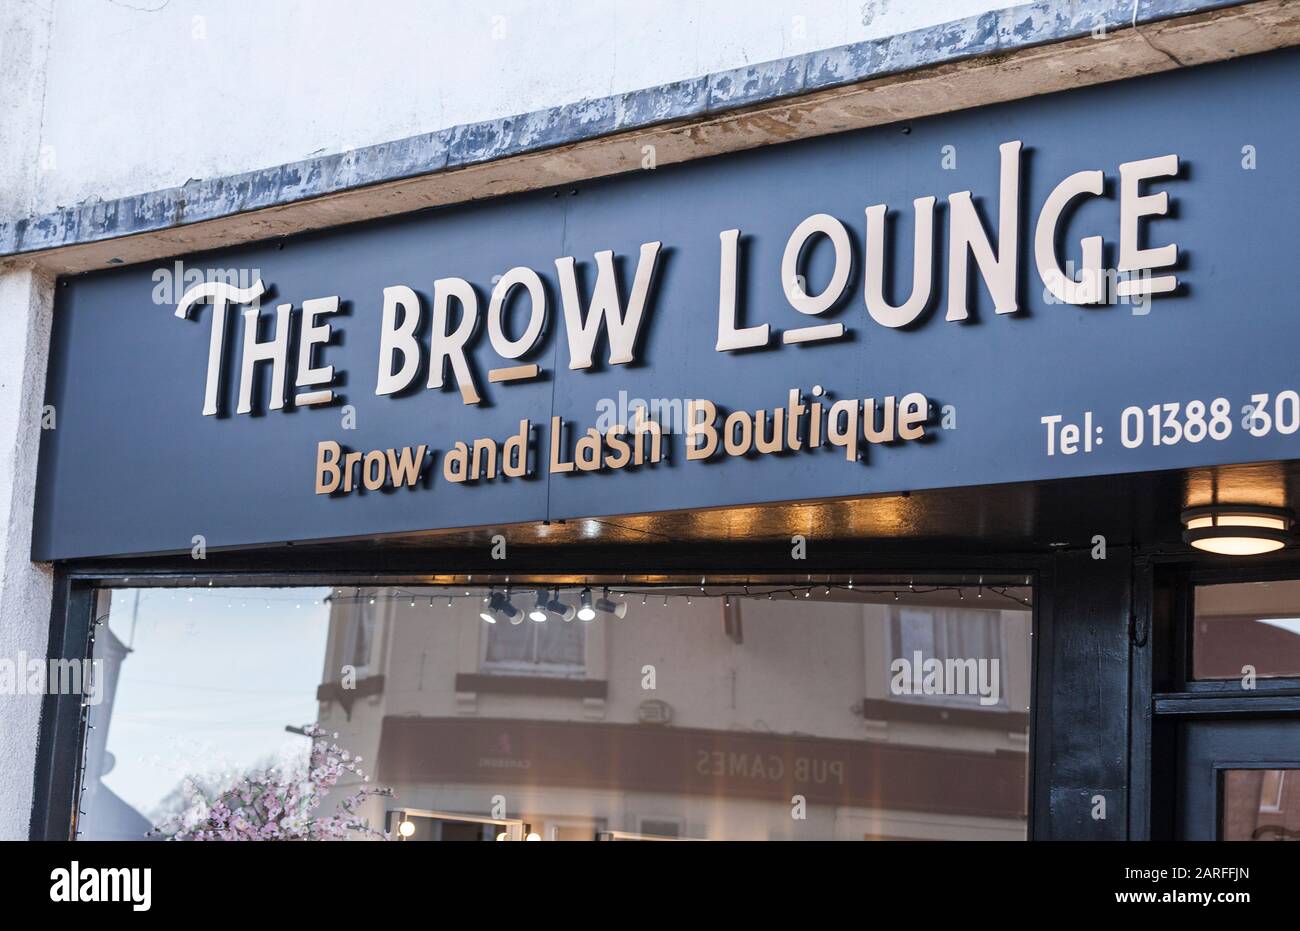 The Brow Lounge, a Brow and Lash boutique in Bishop Auckland,England,UK. Stock Photo